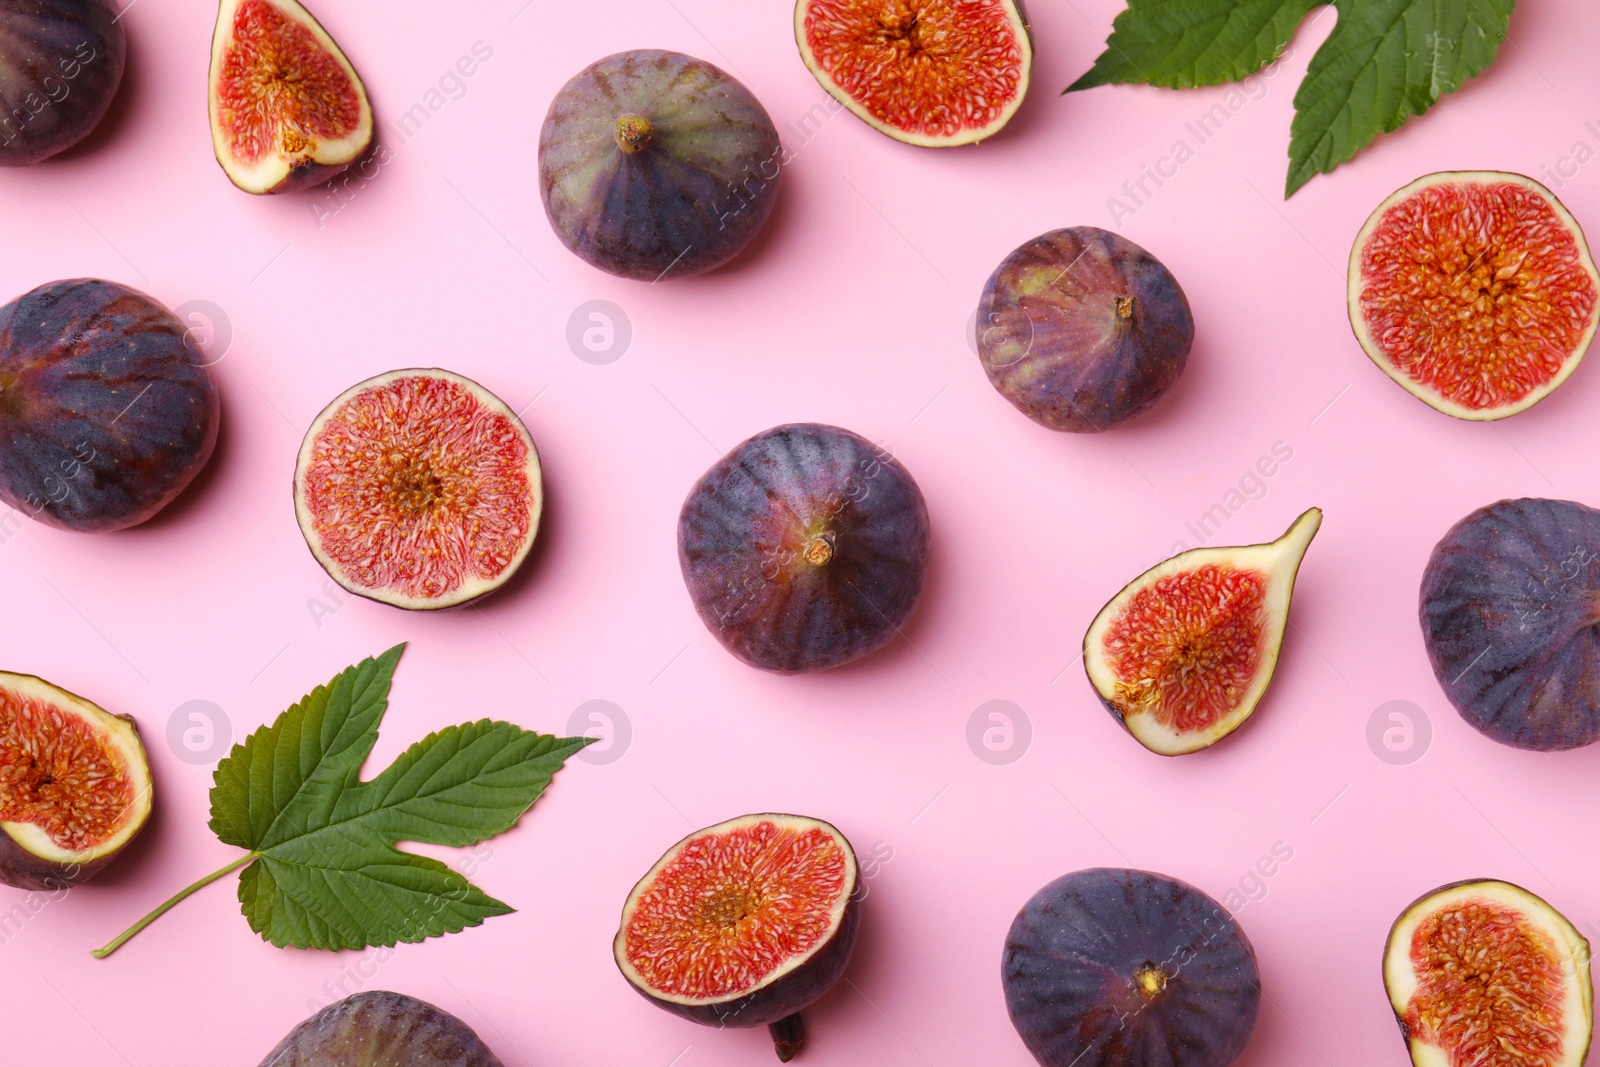 Photo of Fresh ripe figs with green leaves on pink background, flat lay